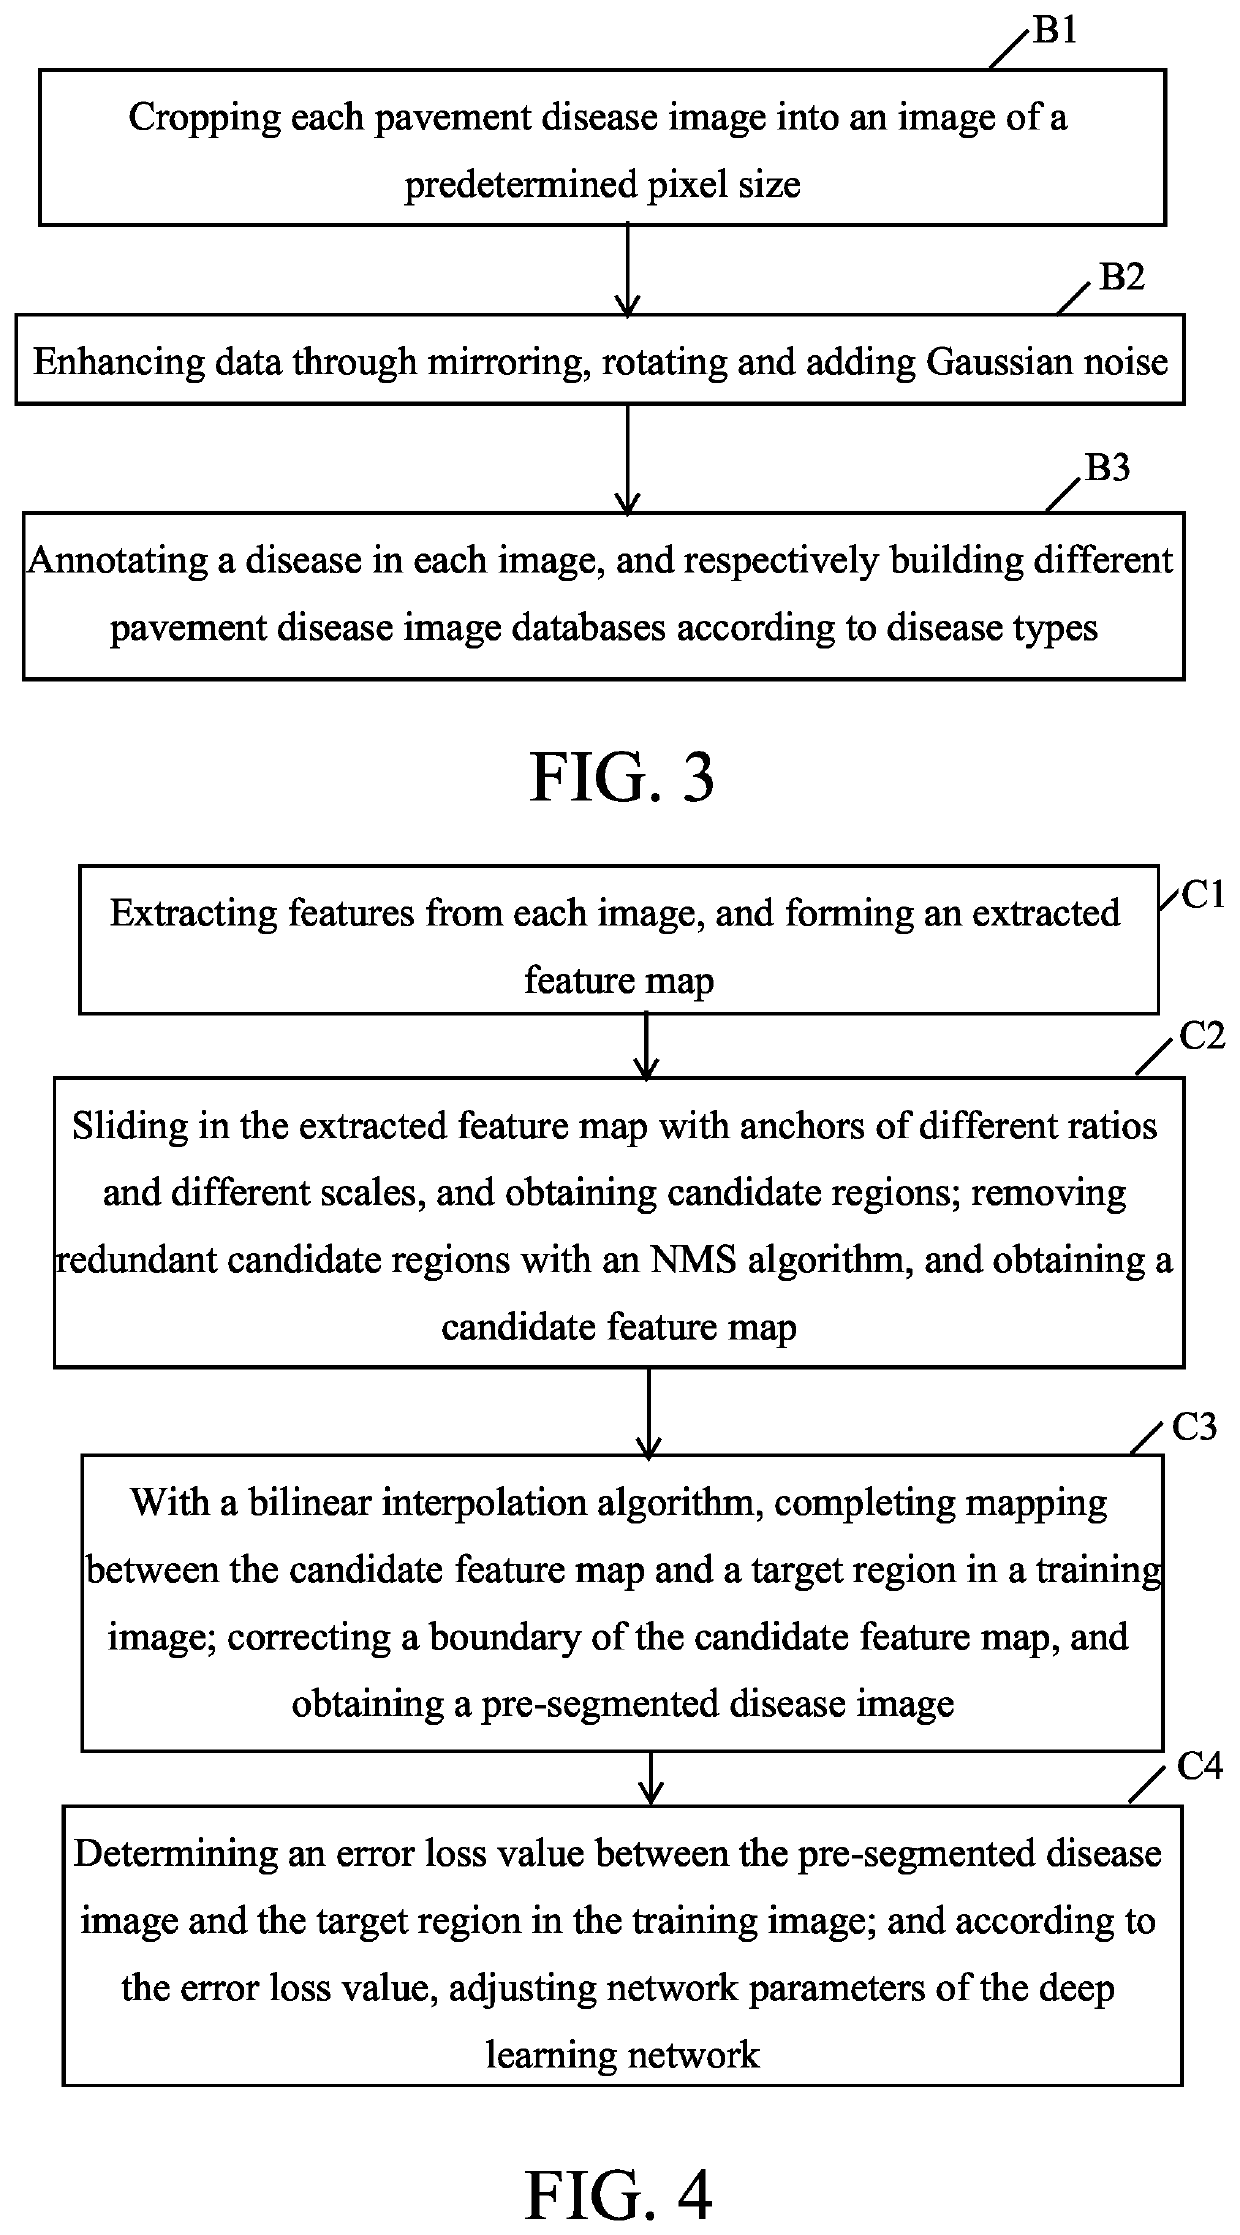 Image segmentation method and system for pavement disease based on deep learning